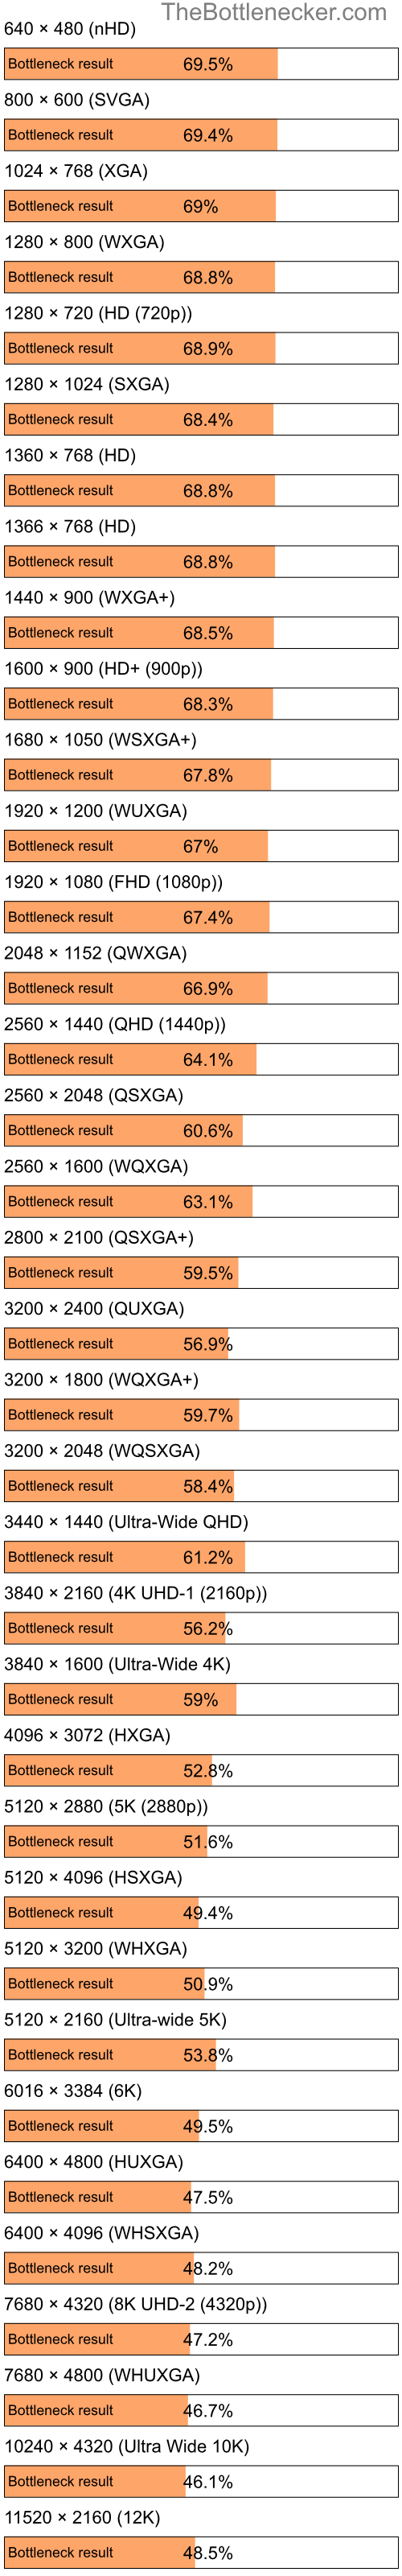 Bottleneck results by resolution for Intel Core i7-960 and NVIDIA GeForce RTX 4090 in Graphic Card Intense Tasks